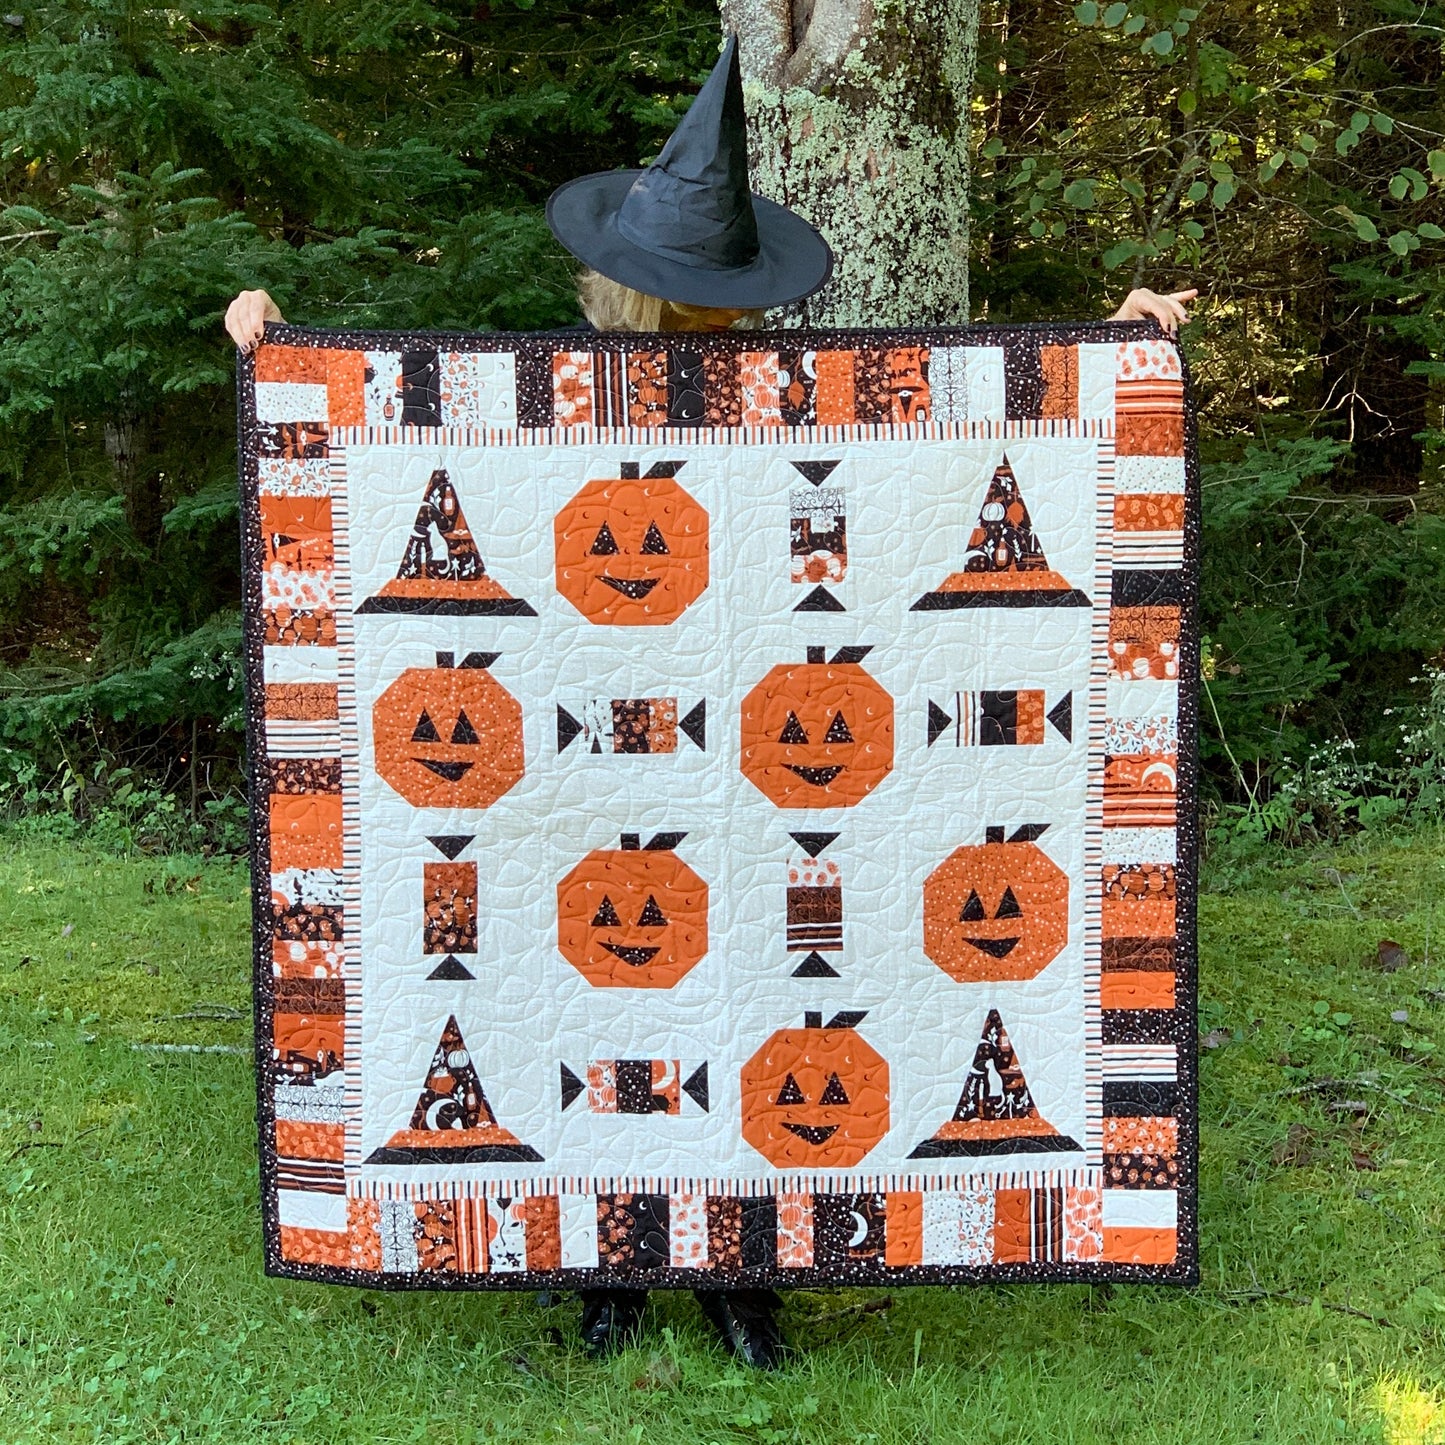 Spellbound "The Candy Witch" Quilt (Downloadable PDF)